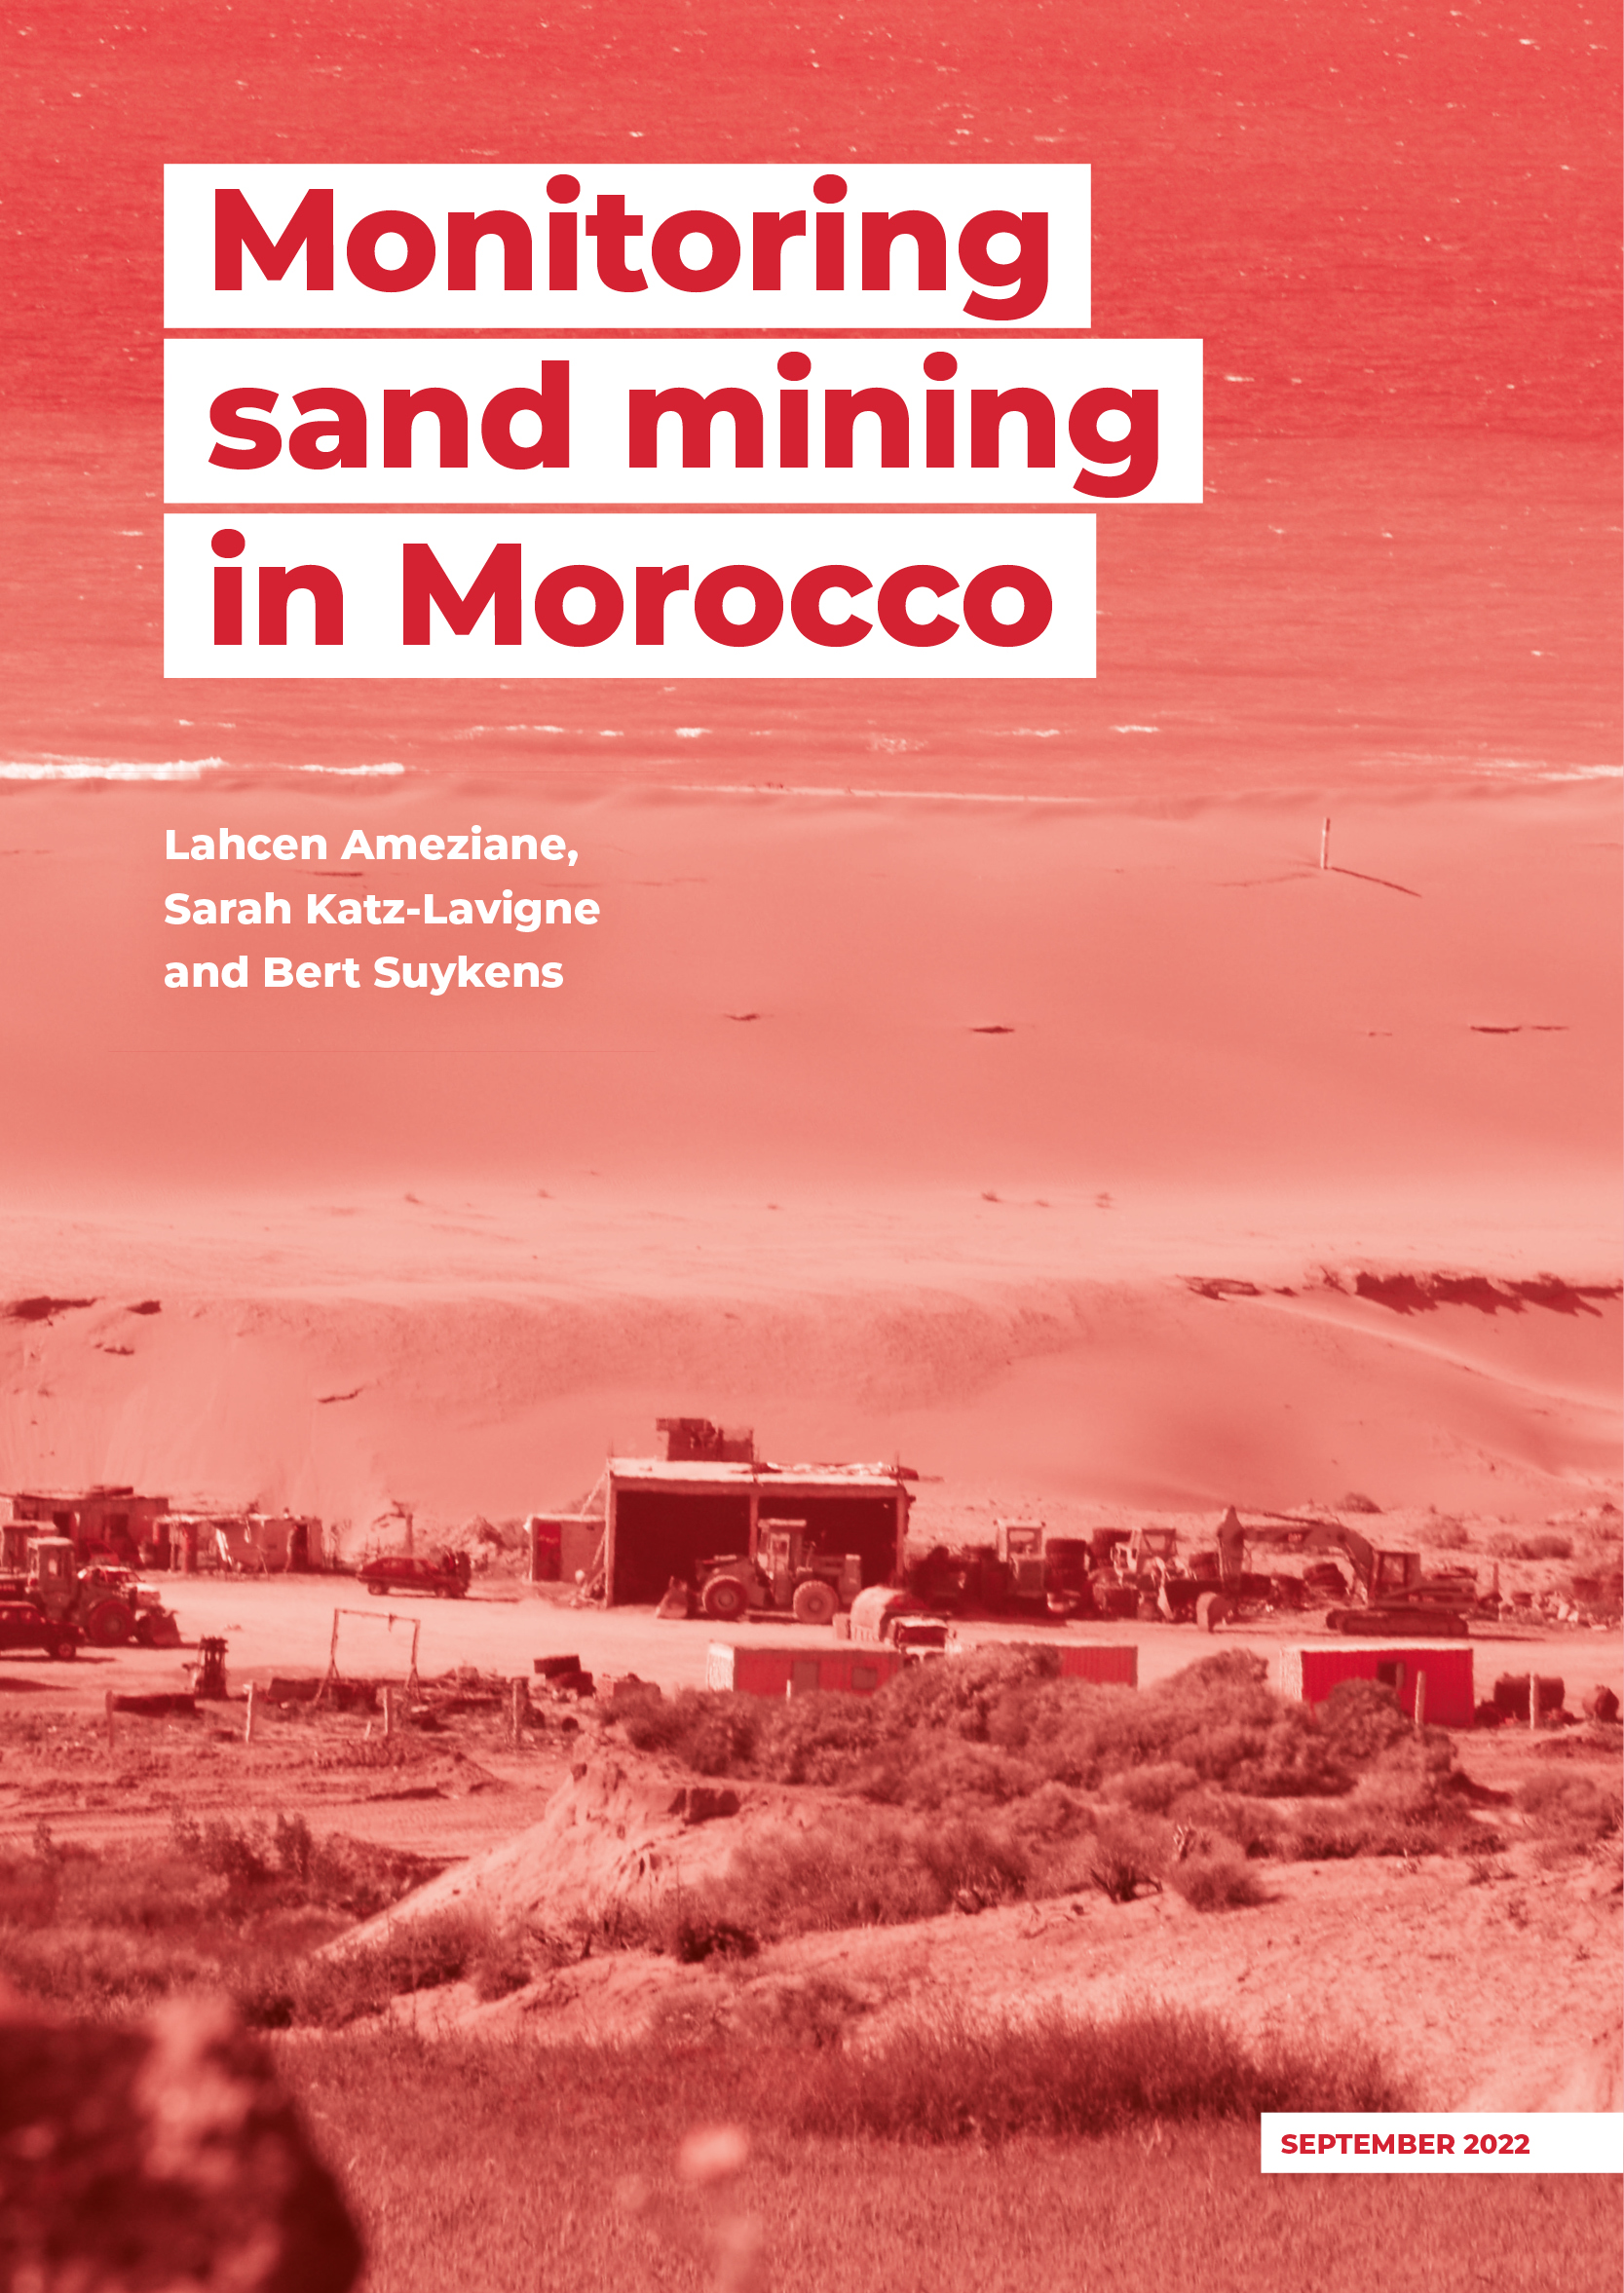 05_Monitoring sand mining in Morocco_4